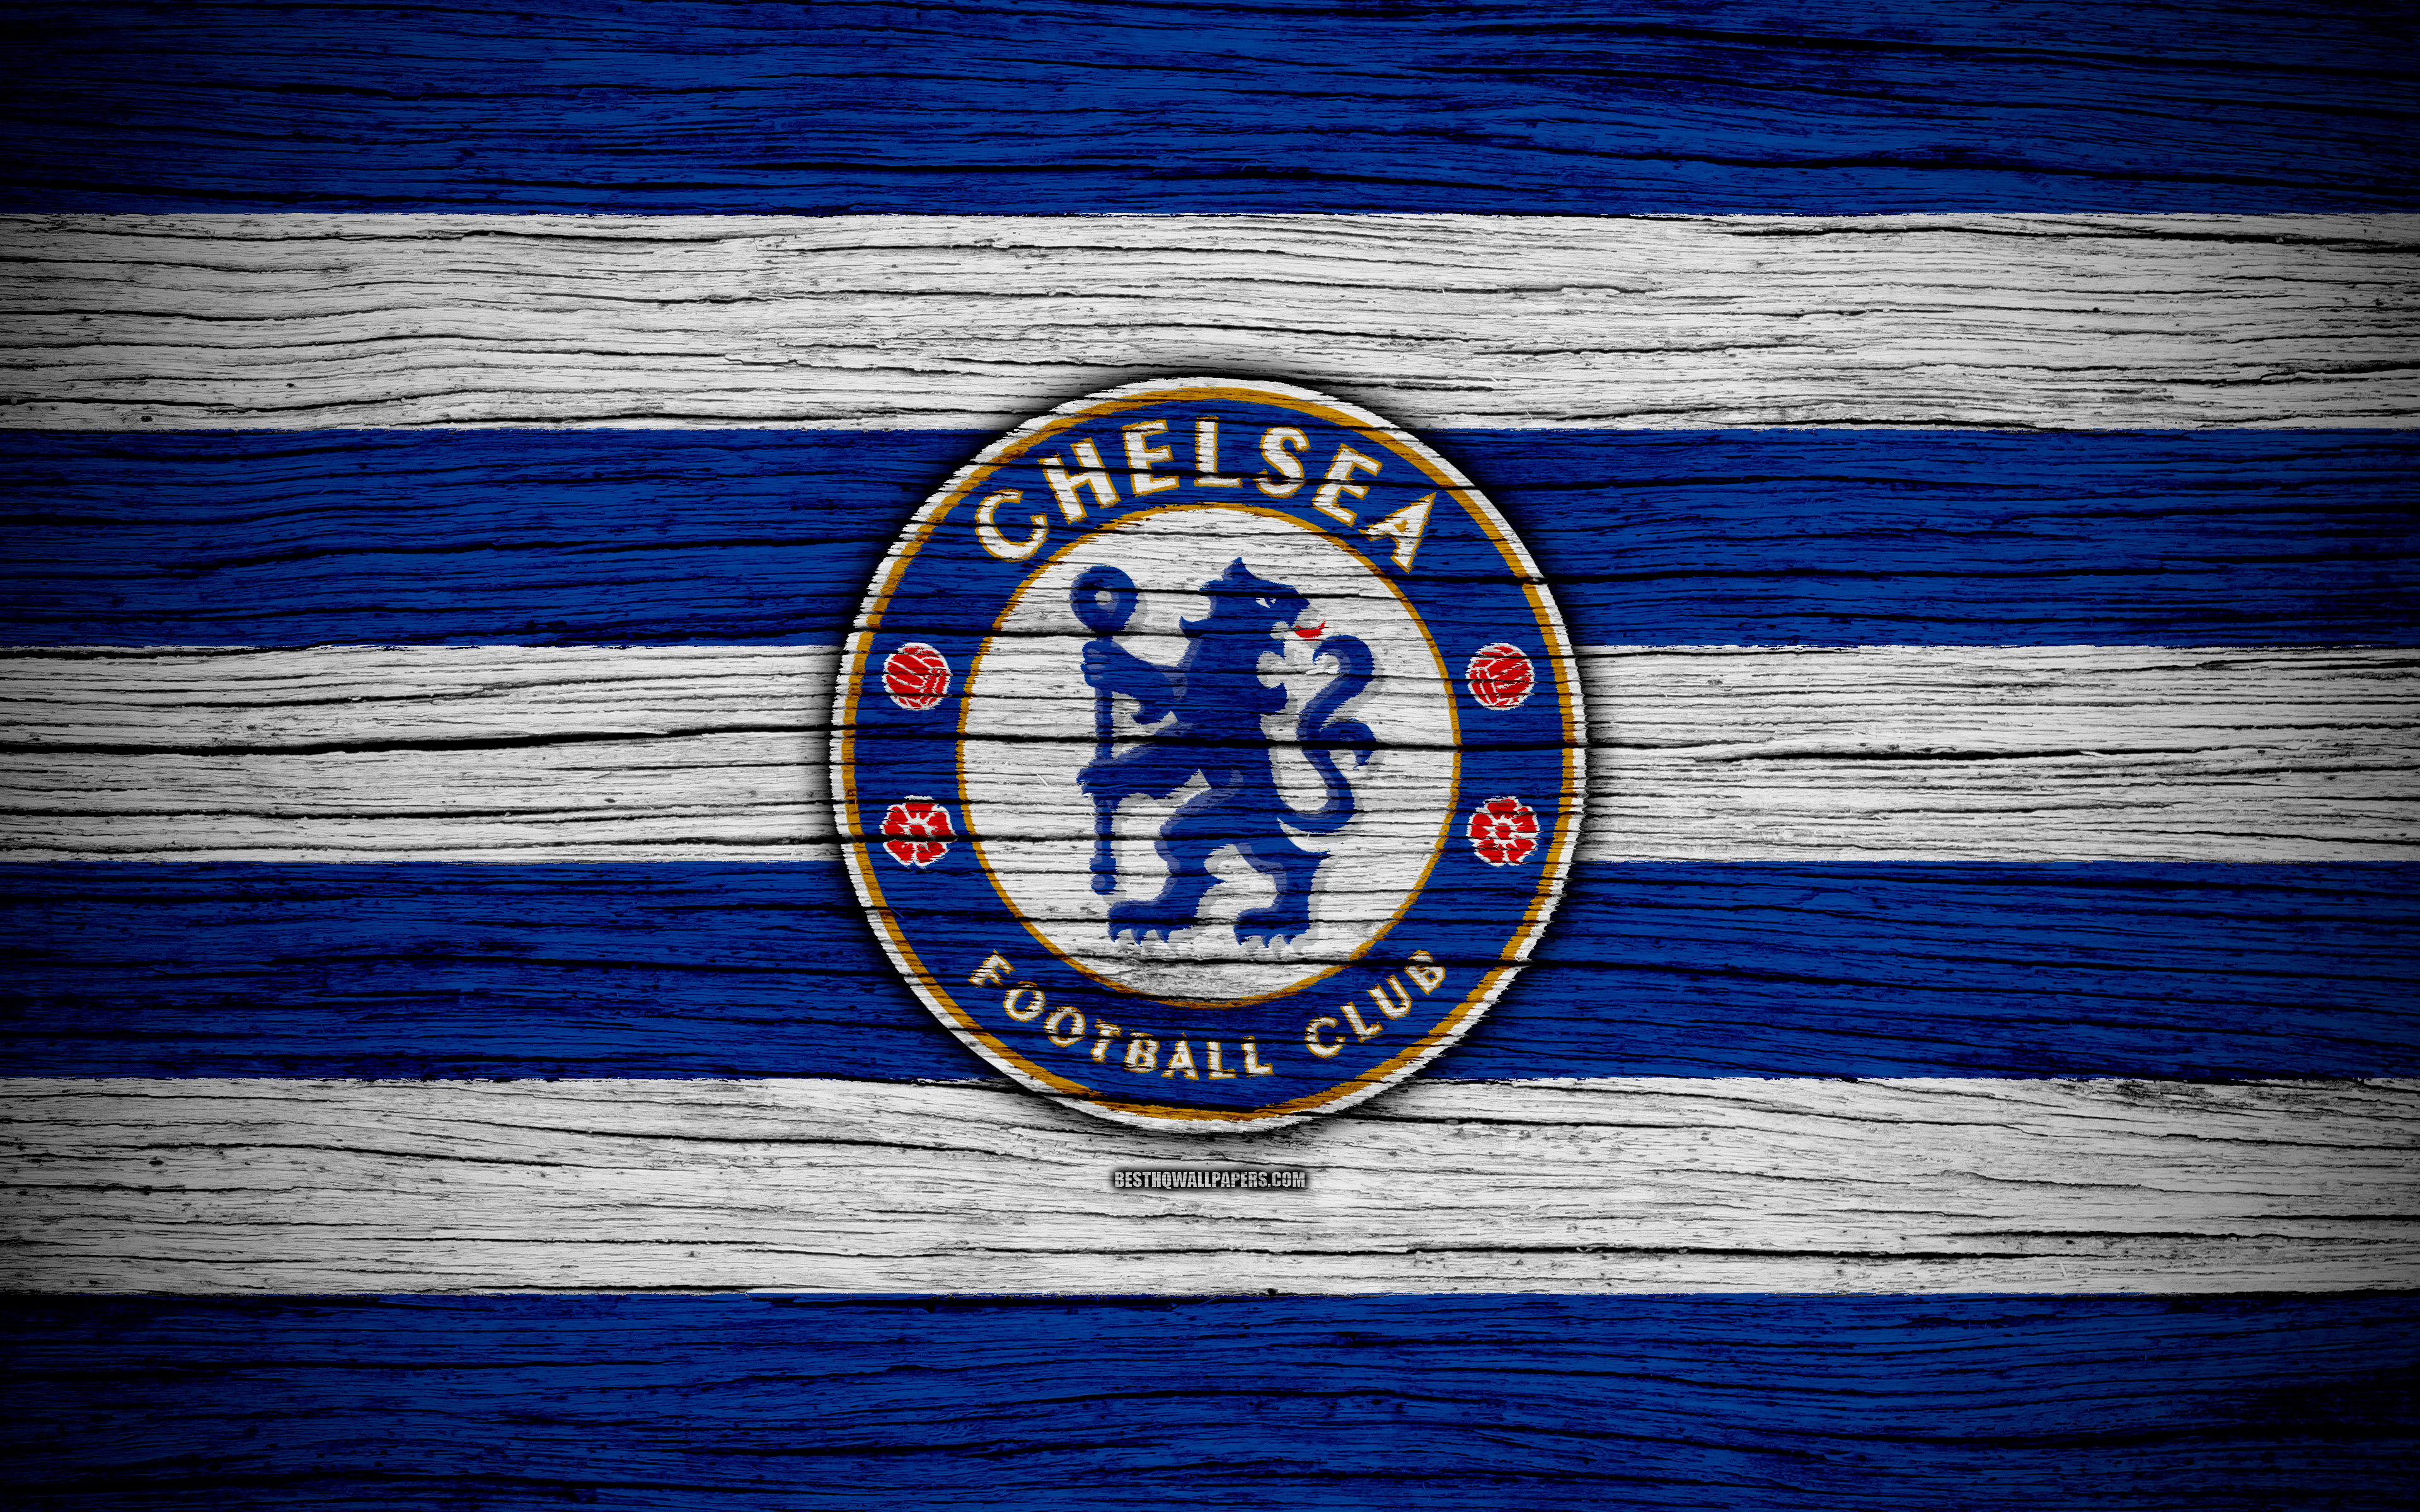 Download wallpaper Chelsea, 4k, Premier League, logo, England, wooden texture, FC Chelsea, soccer, football, Chelsea FC for desktop with resolution 3840x2400. High Quality HD picture wallpaper